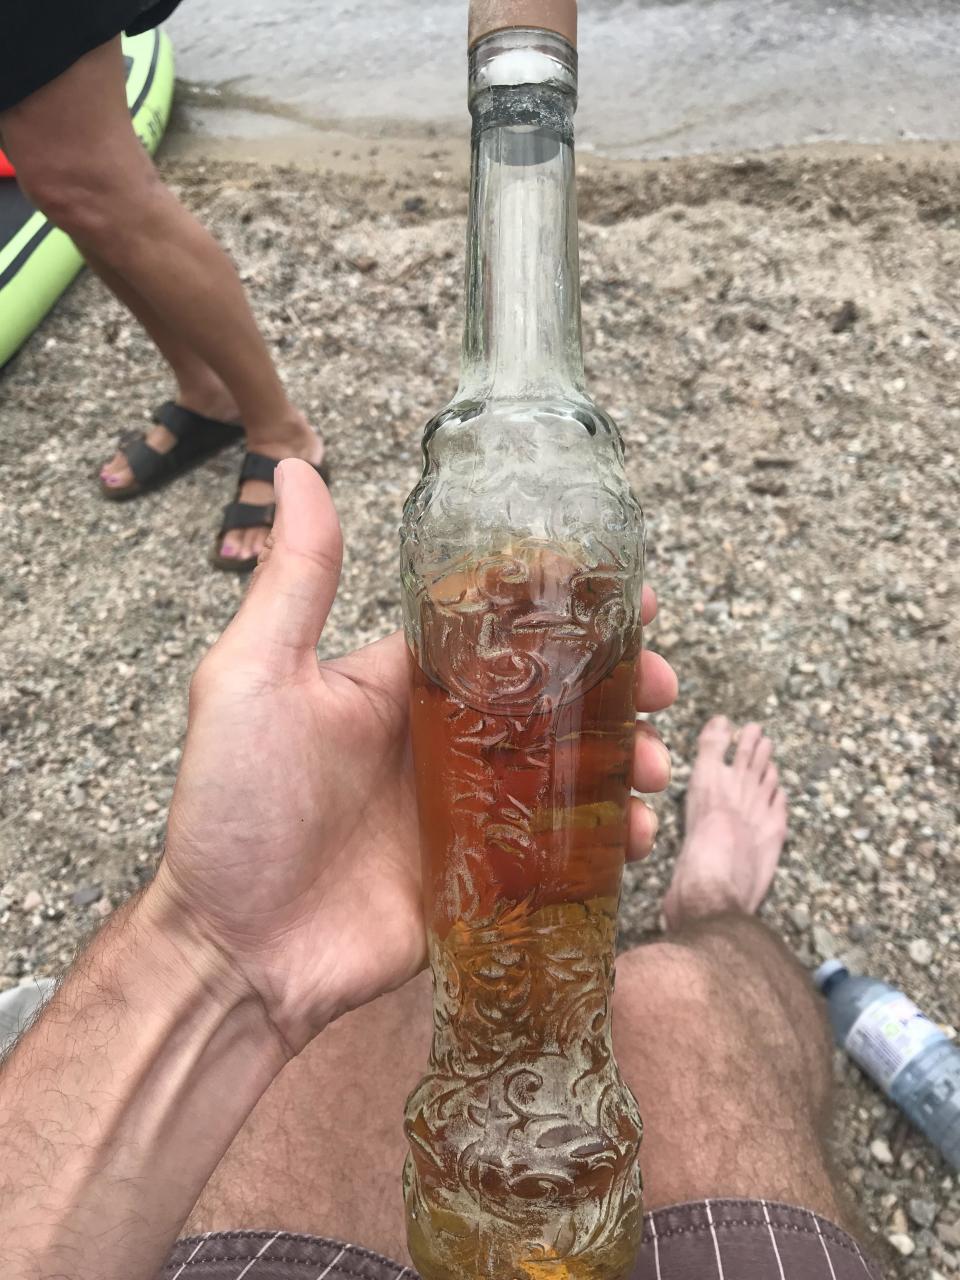 thin, tall, engraved glass bottle with liquid in it